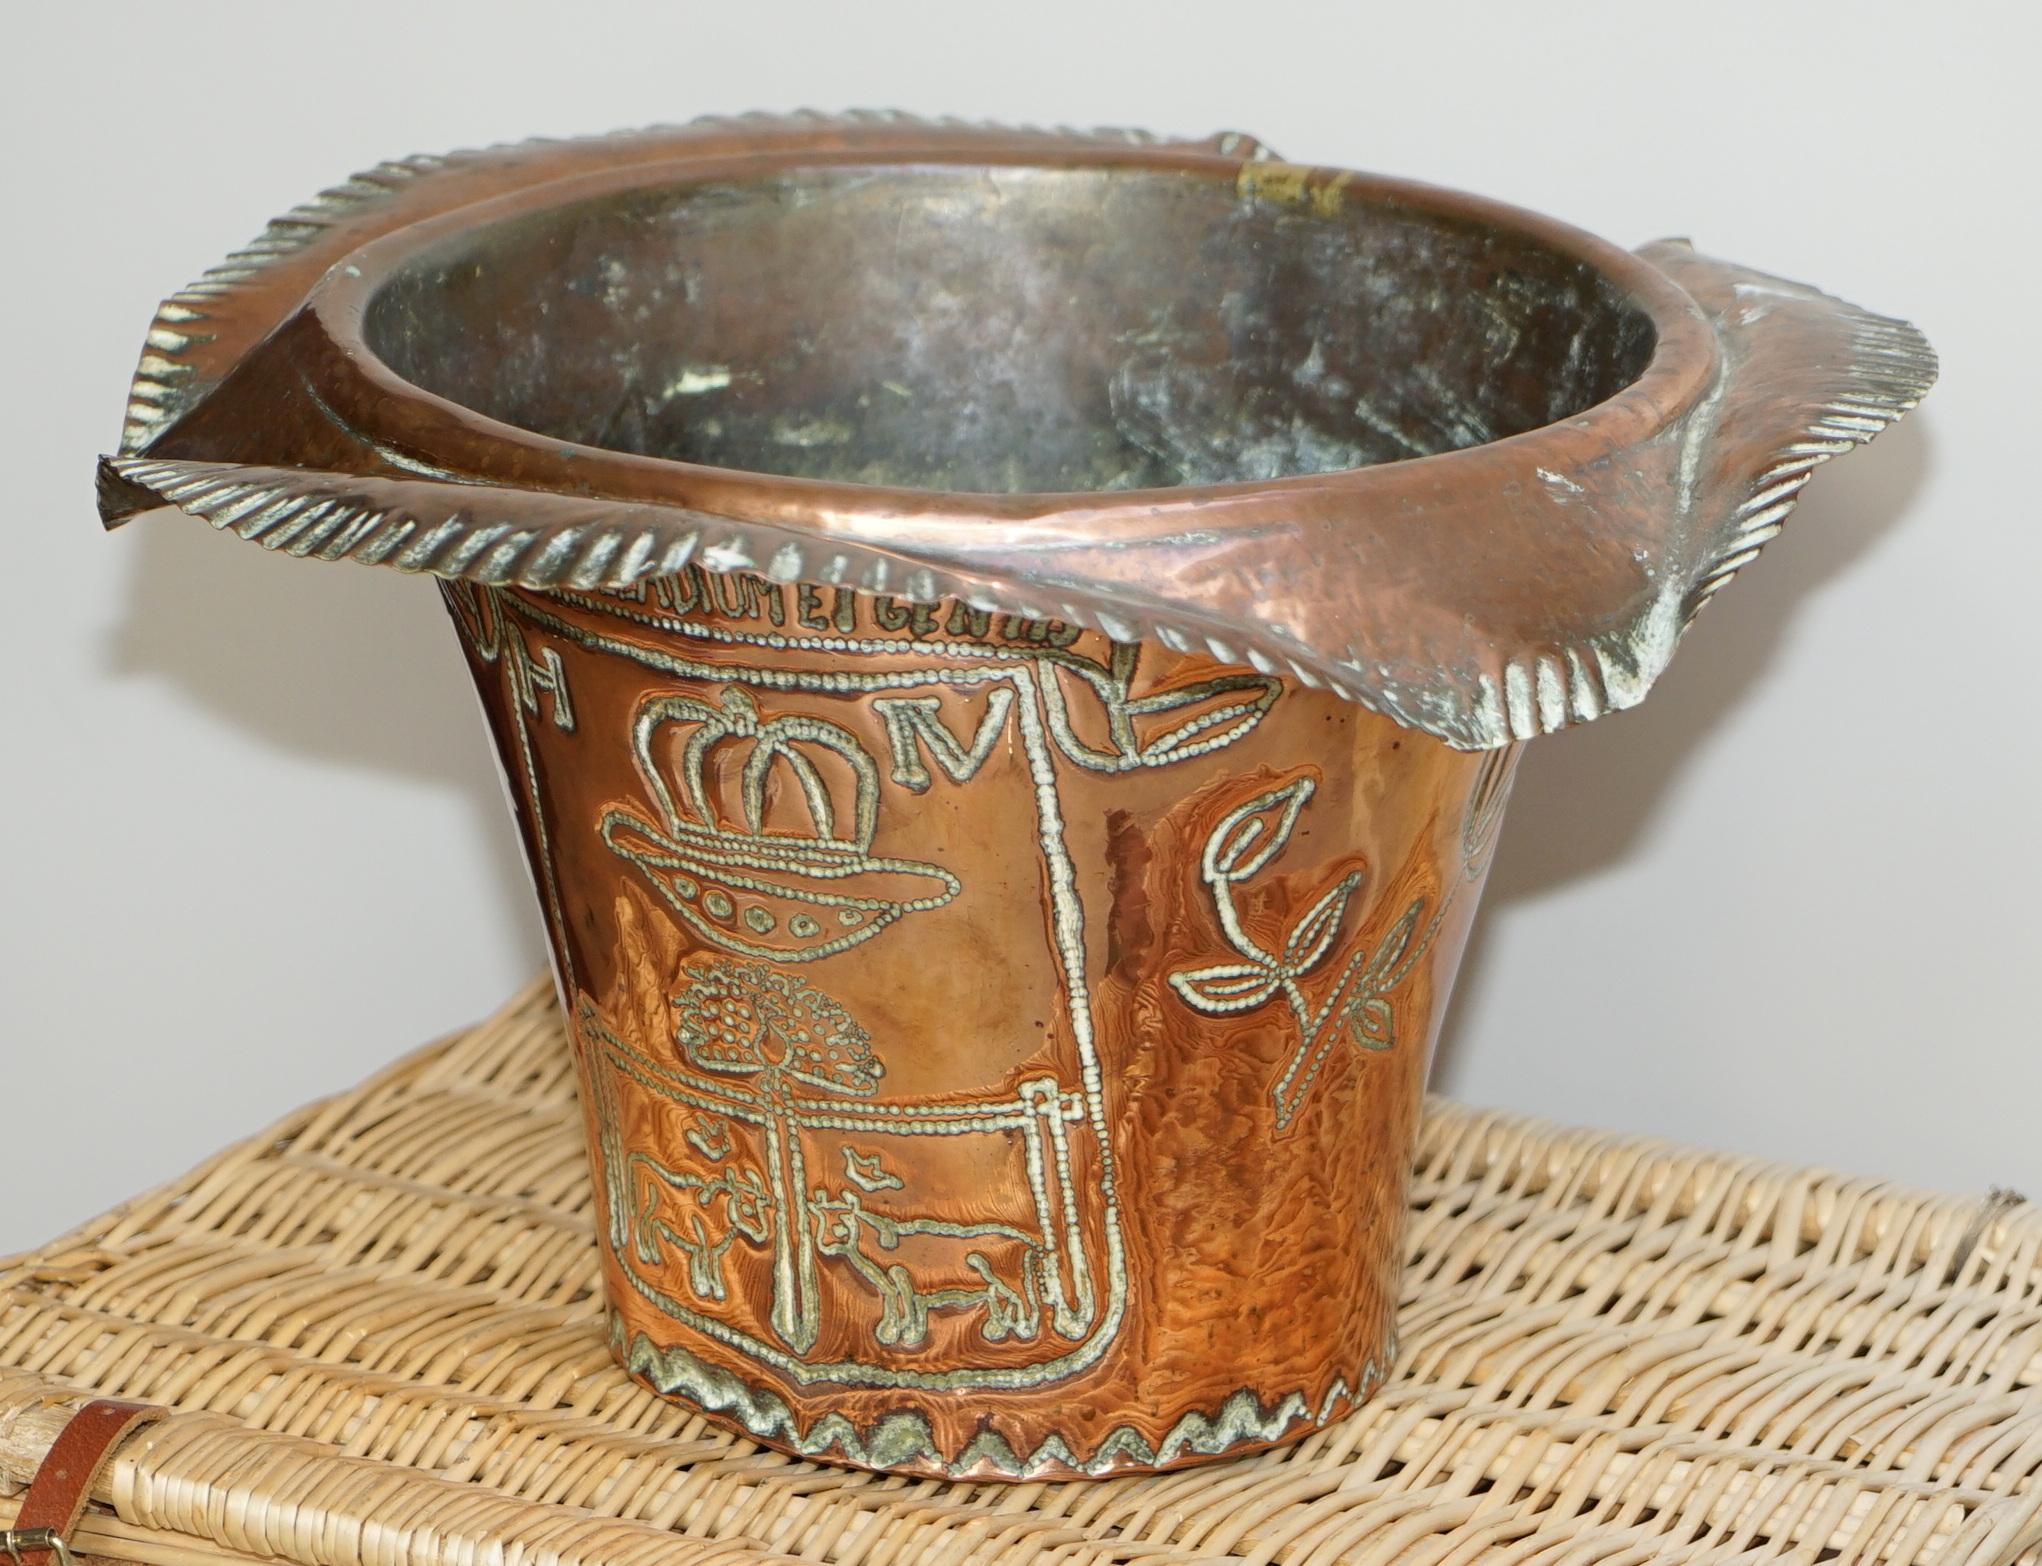 We are delighted to offer for sale this lovely circa 1930’s copper ice or Champaign bucket with the King Henry IV armorial crest coat of arms on the front

A very good looking and well made piece, this was a souvenir item in the 1930’s made in Pau